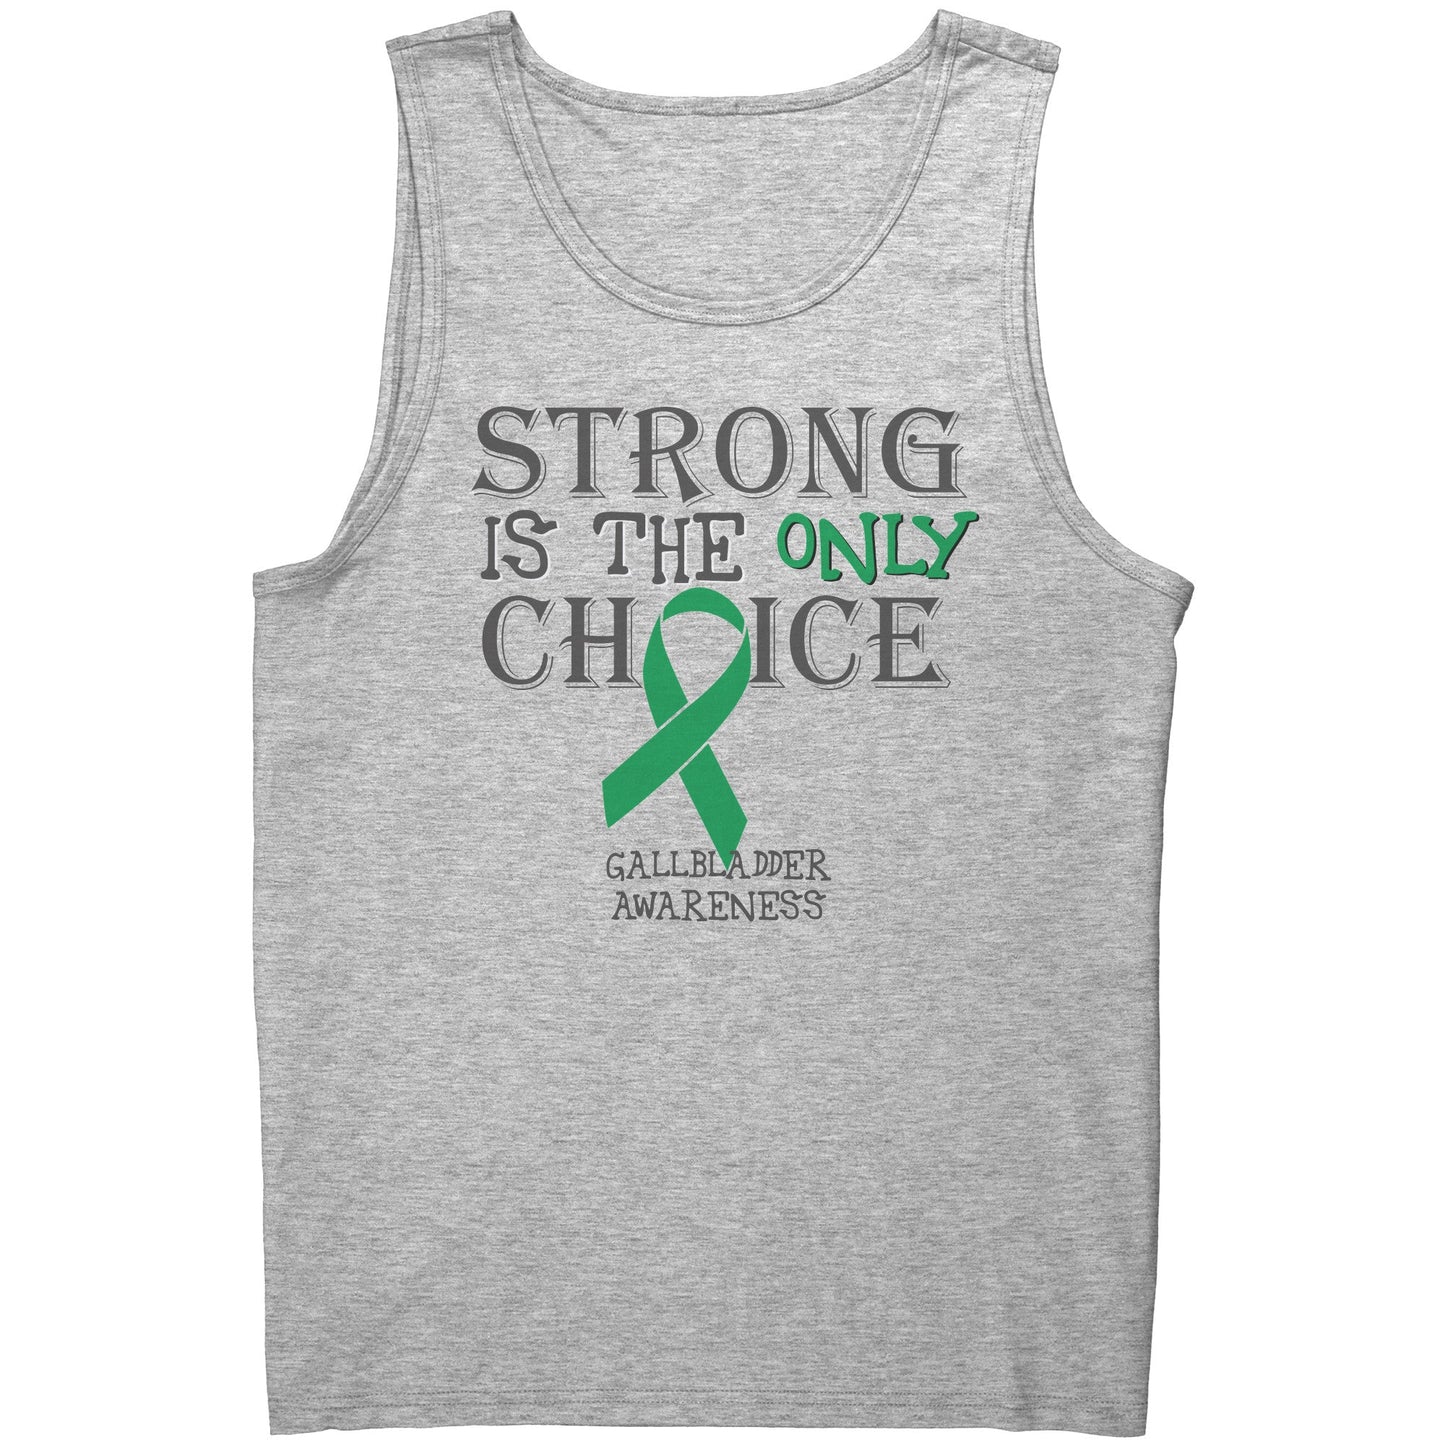 Strong is the Only Choice -Gallbladder Cancer Awareness T-Shirt, Hoodie, Tank |x|